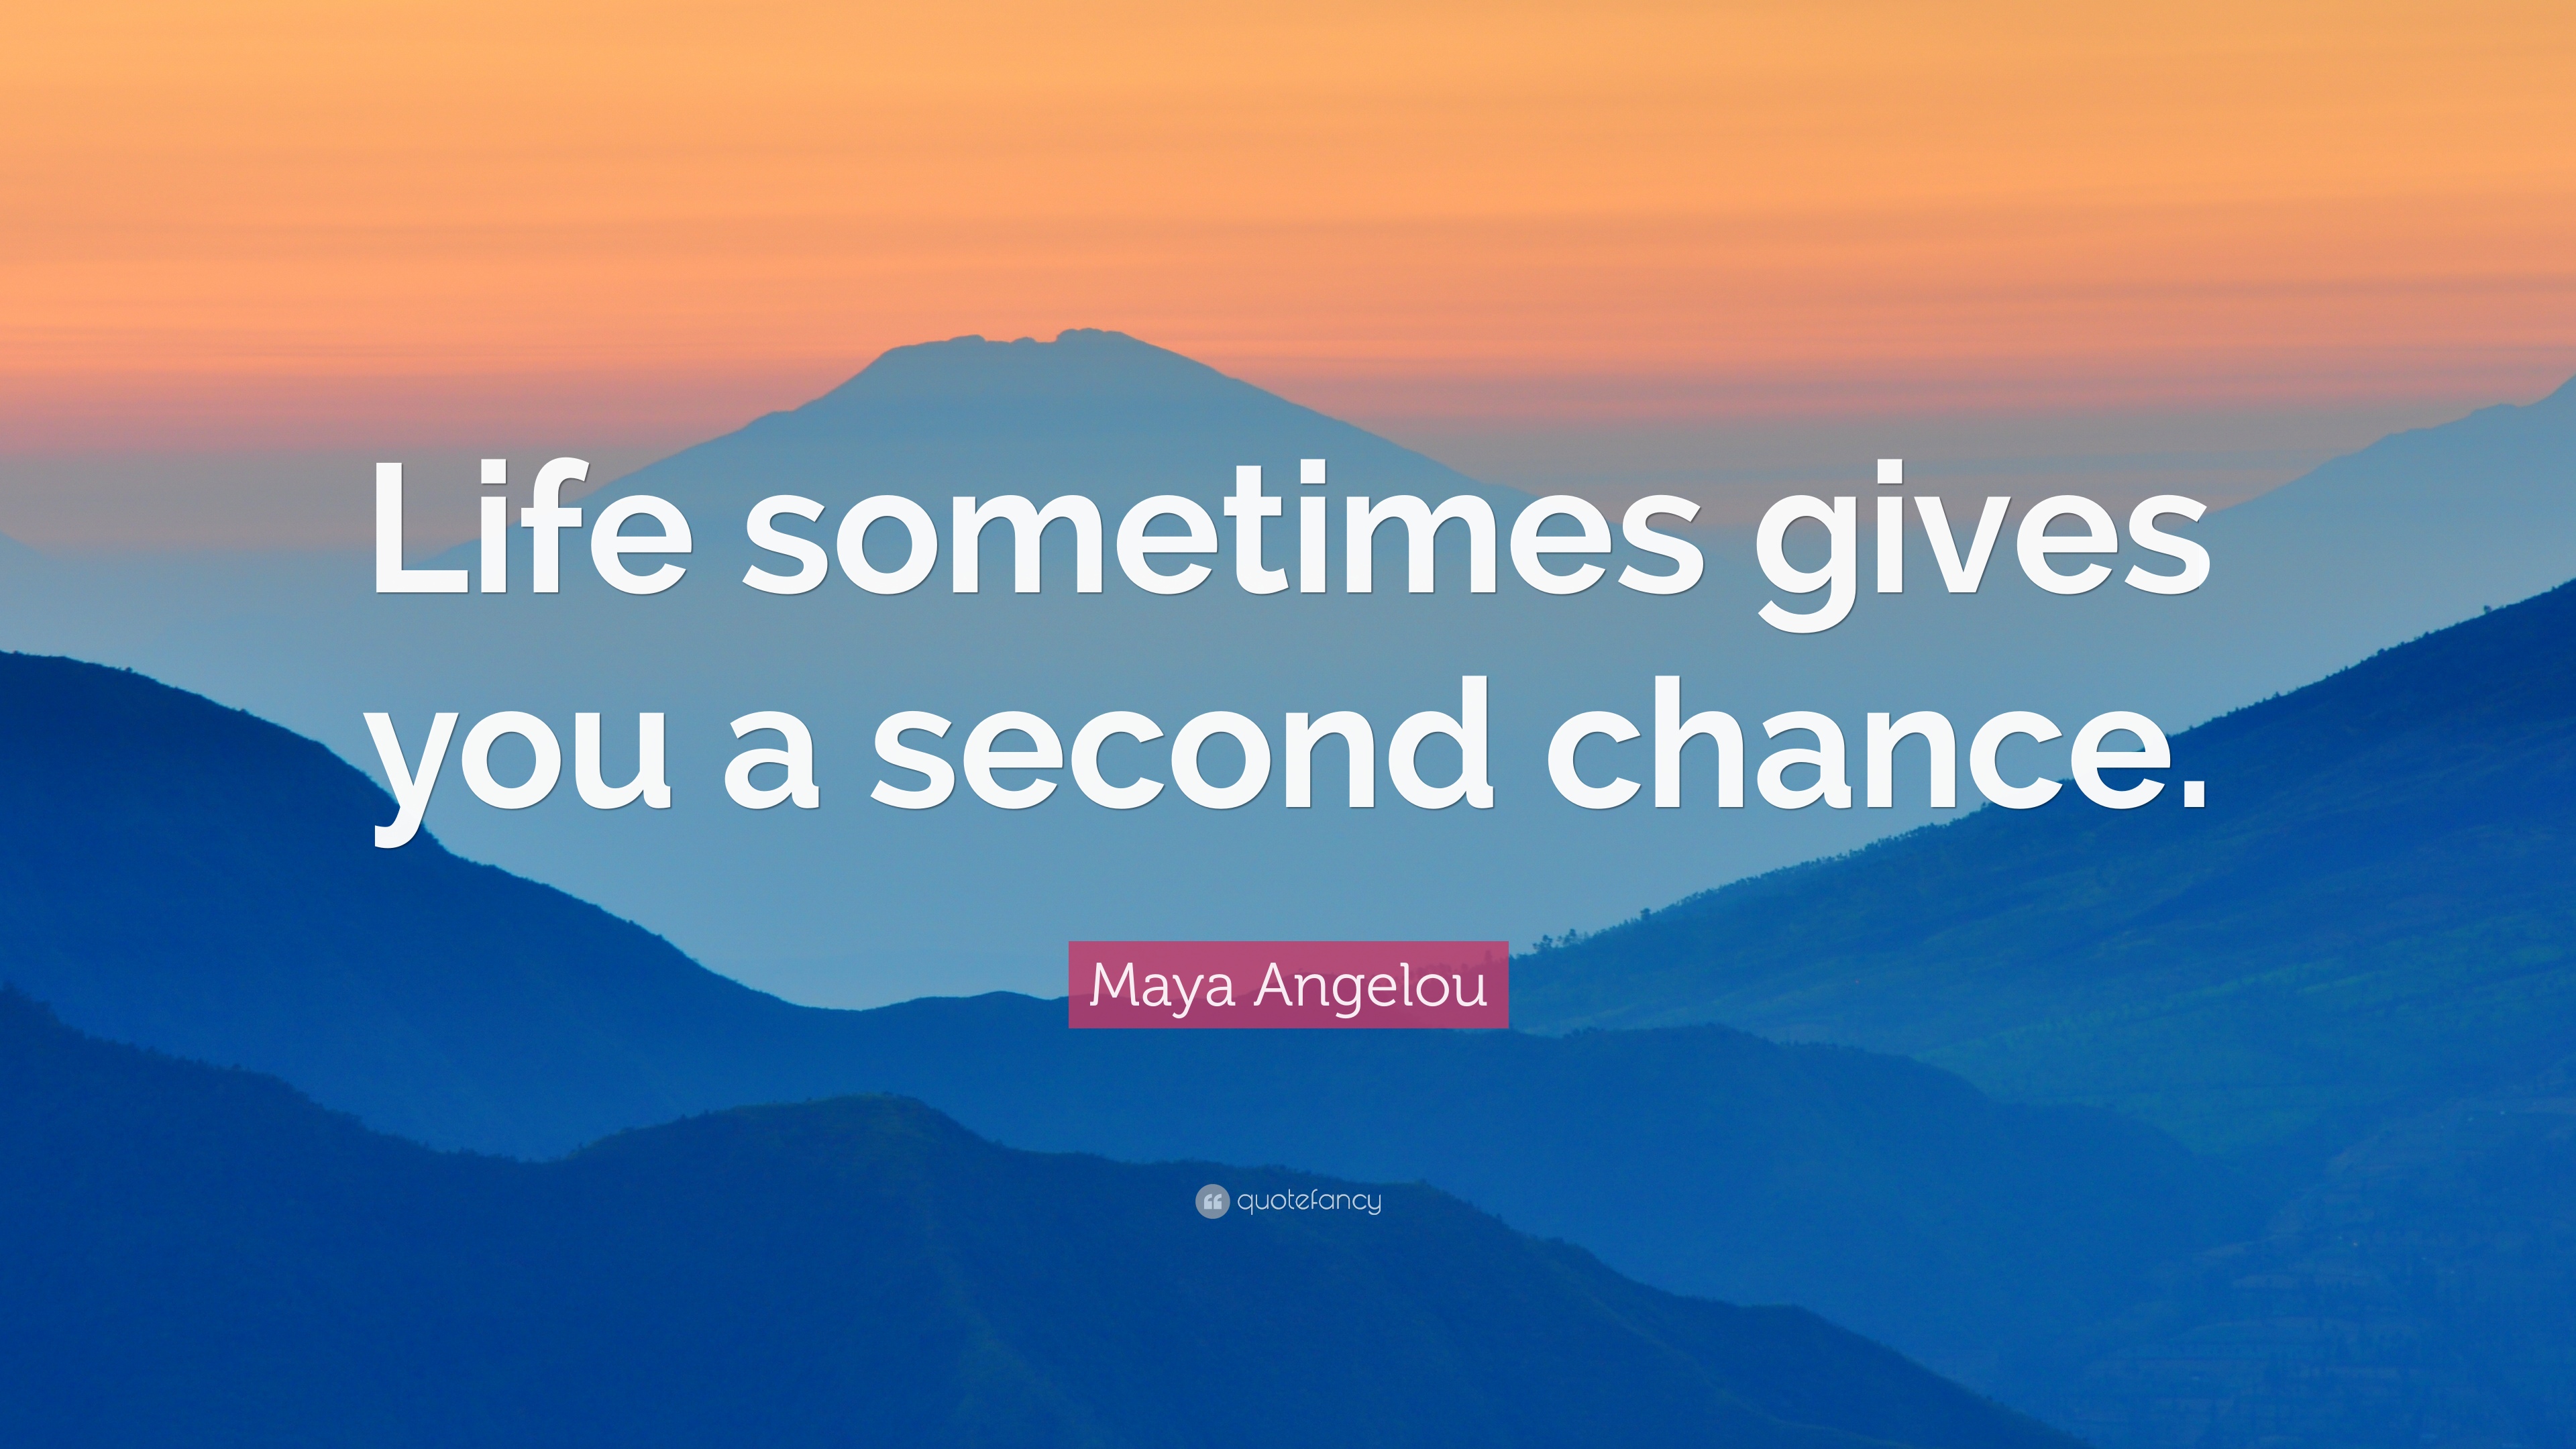 Maya Angelou Quote: “Life sometimes gives you a second